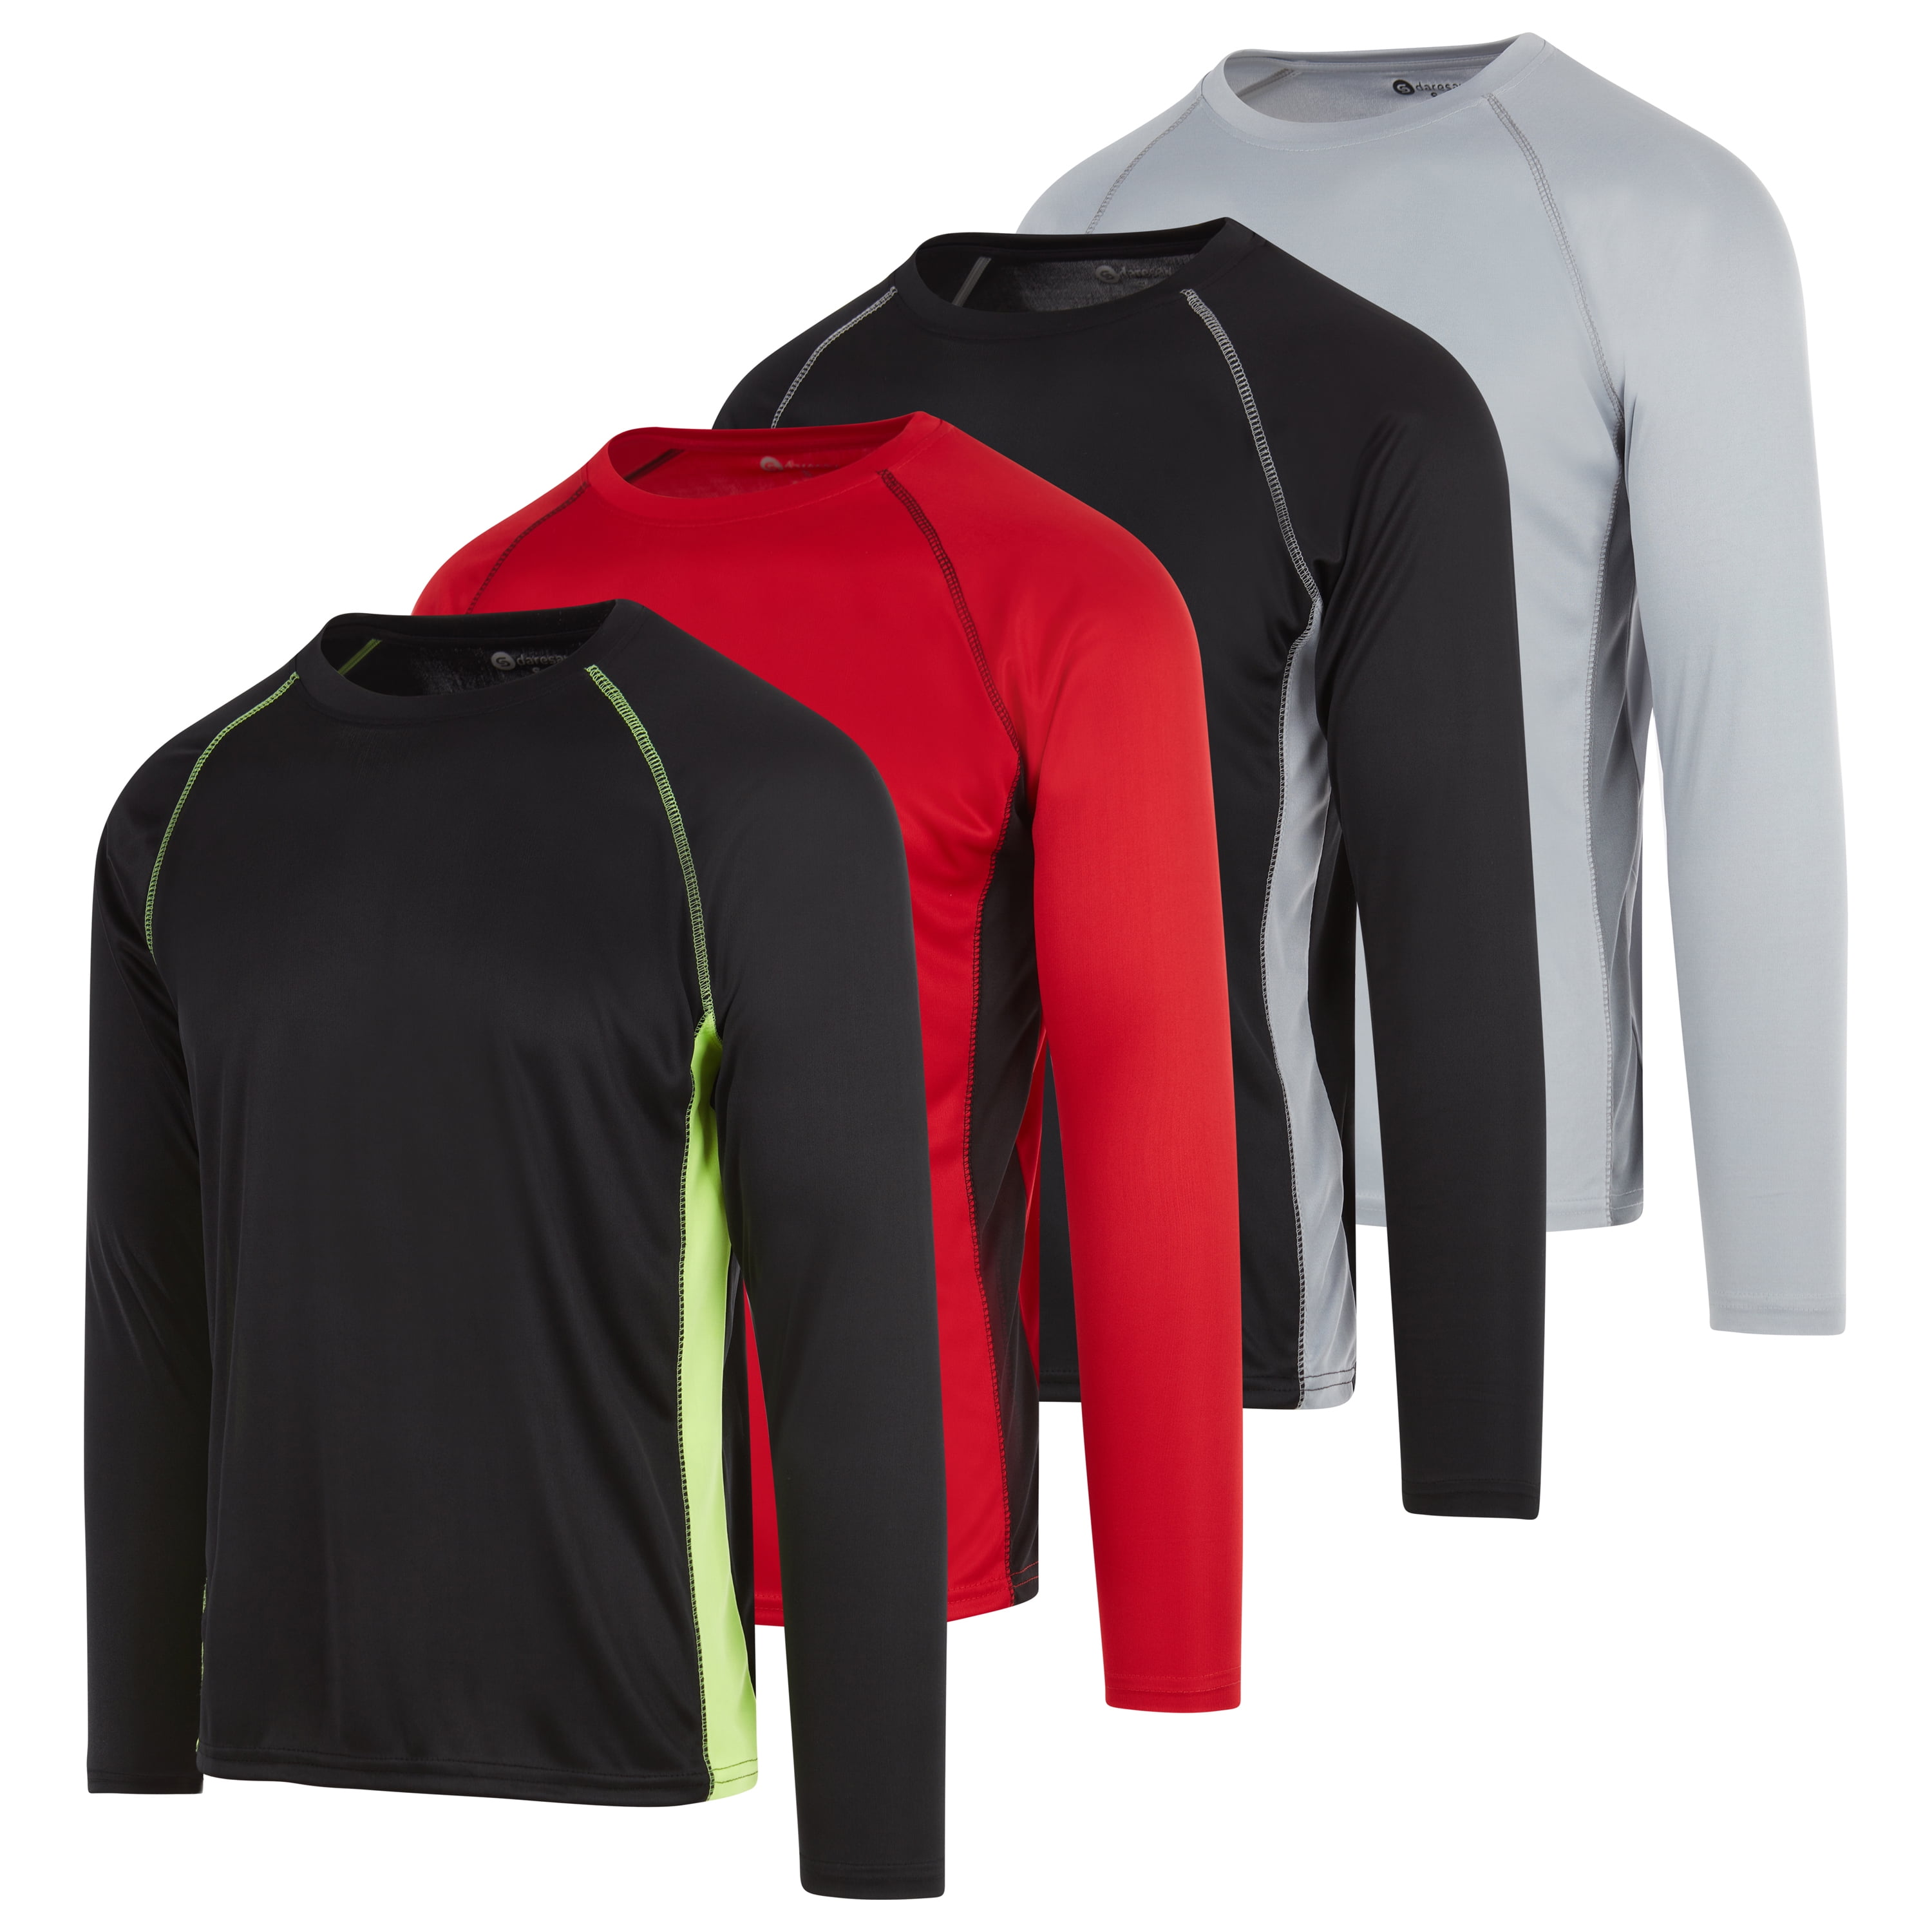 DARESAY Dri-Fit Long Sleeve T Shirts for Men-4 Pack- Moisture Wicking,  Quick Dry Tees (Up to 3XL) 